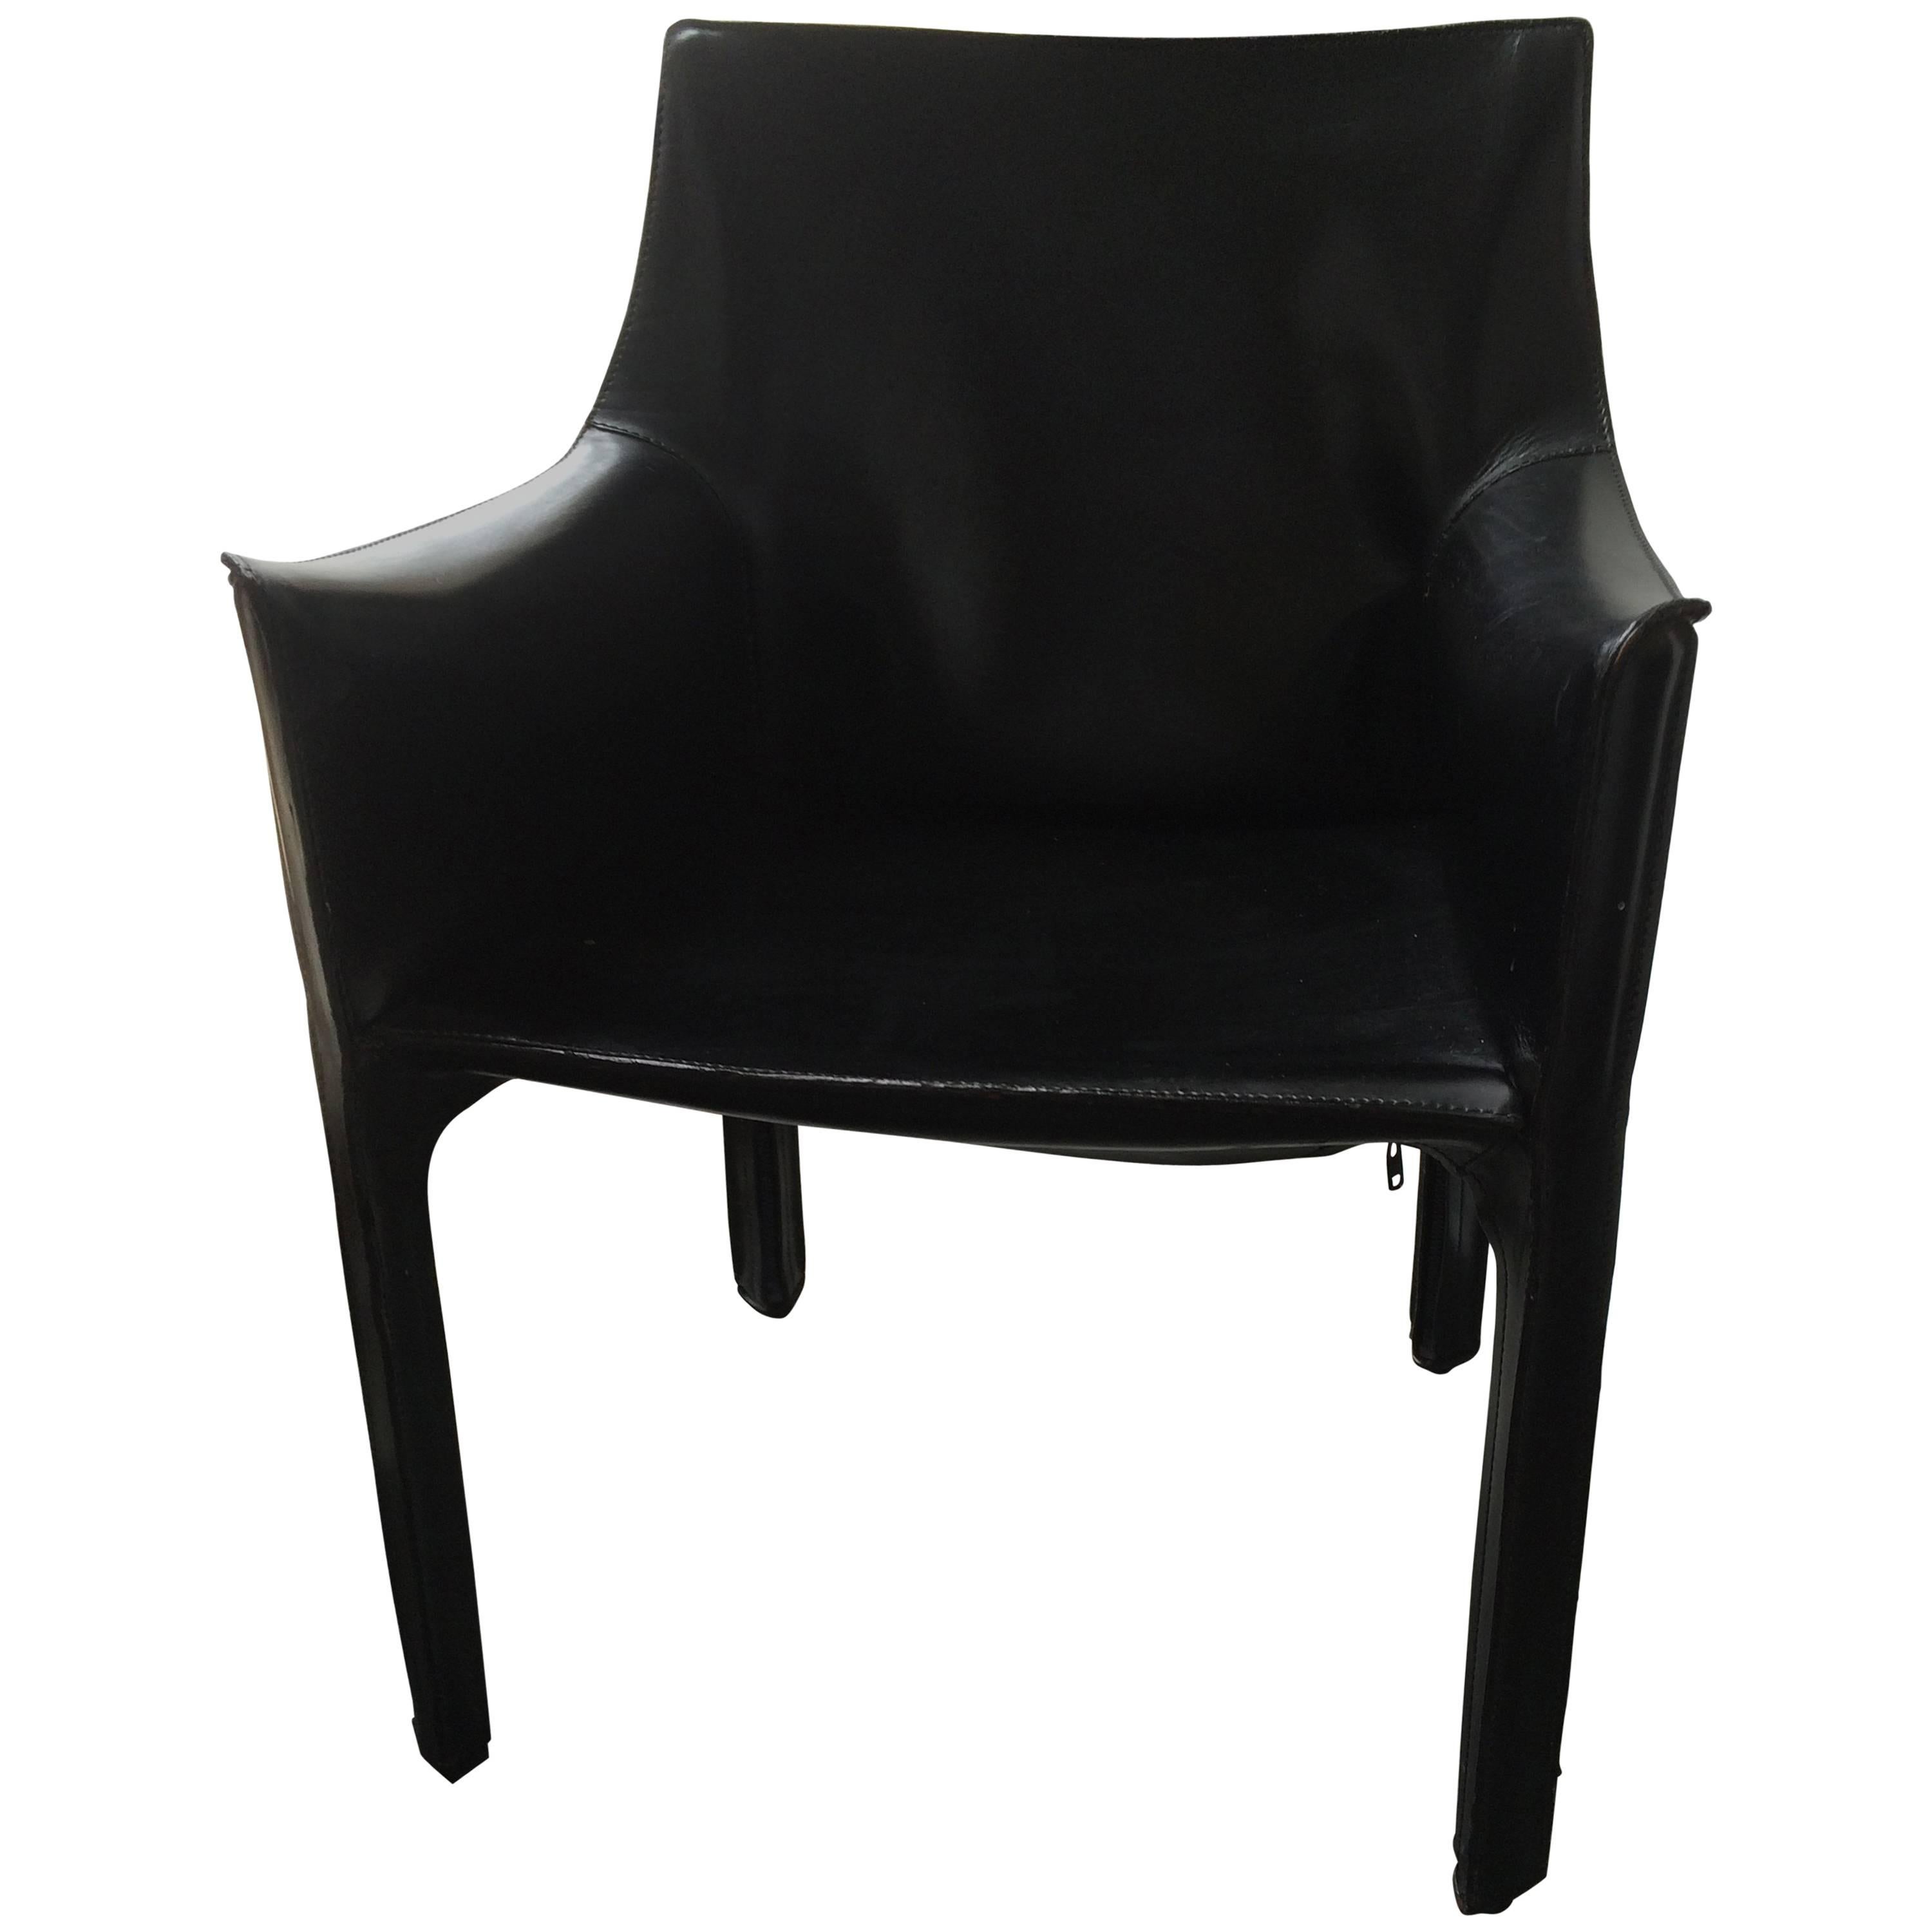 Pair of Cab Chairs by Cassina